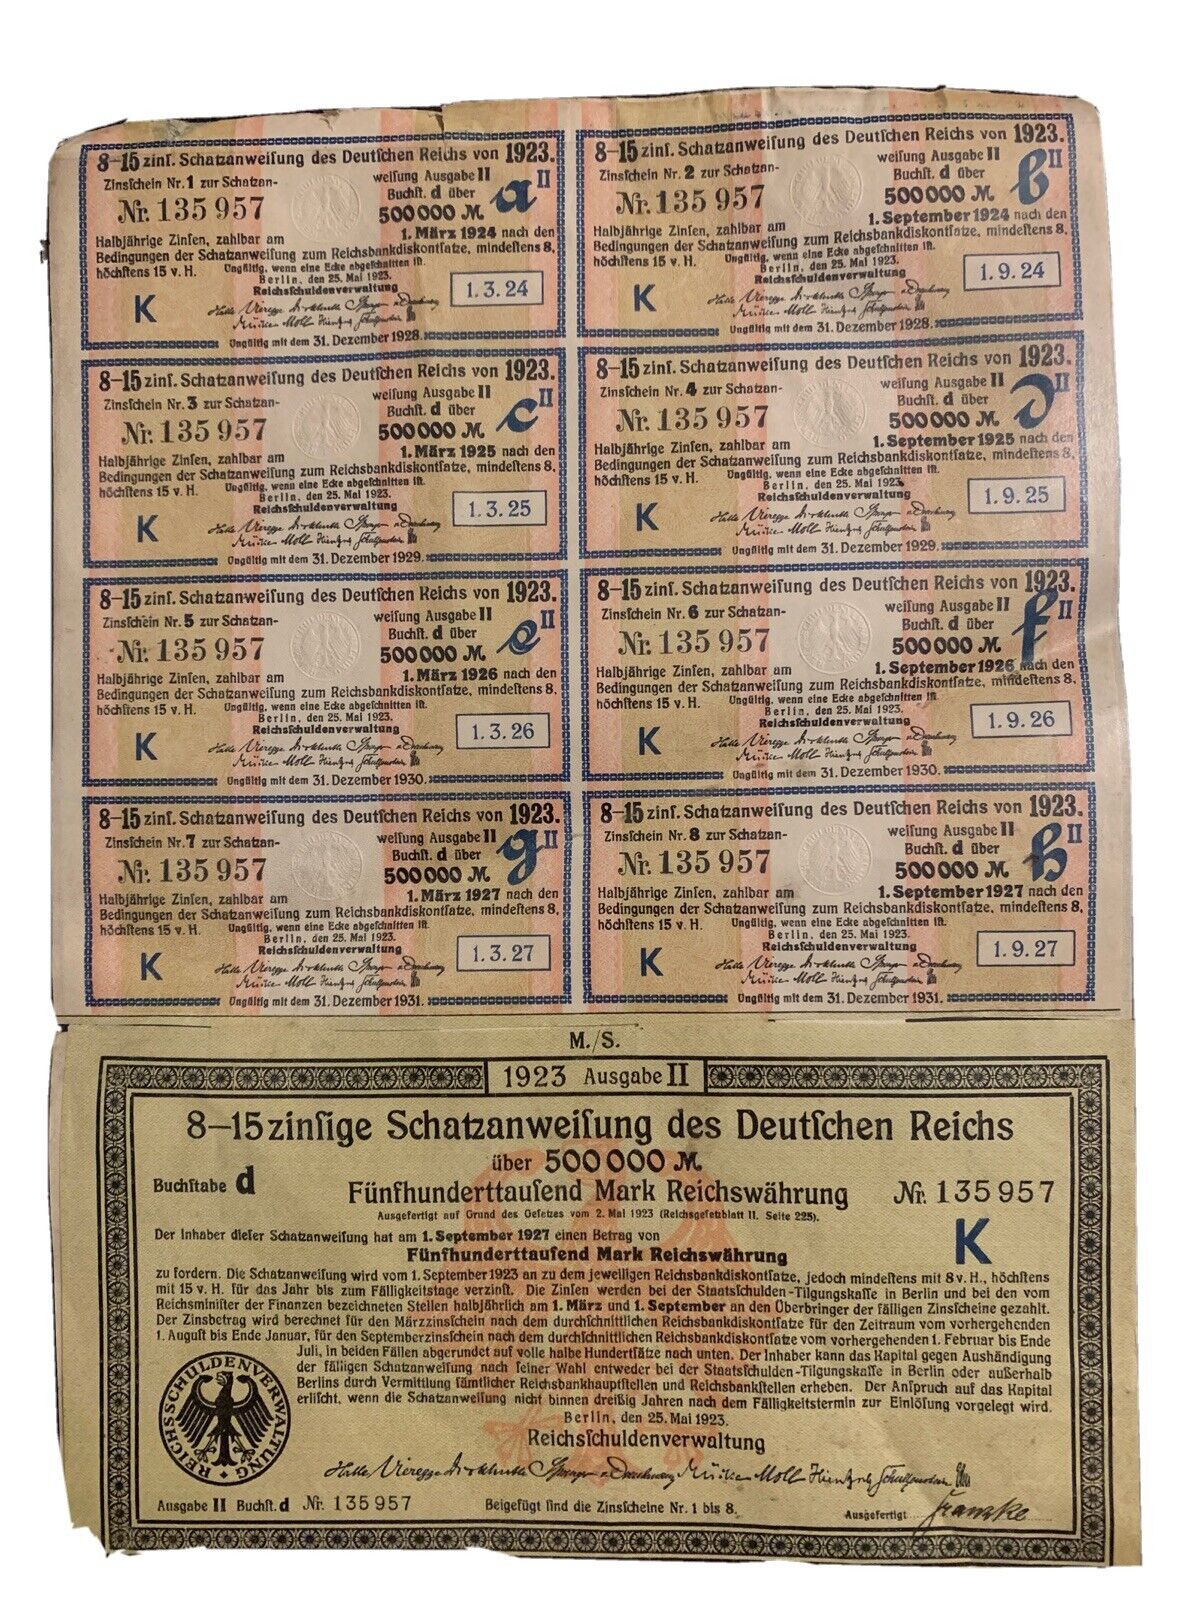 (All 4) GERMANY German 8-15% Treasury Bond 500,000 Marks 1924 with coupons